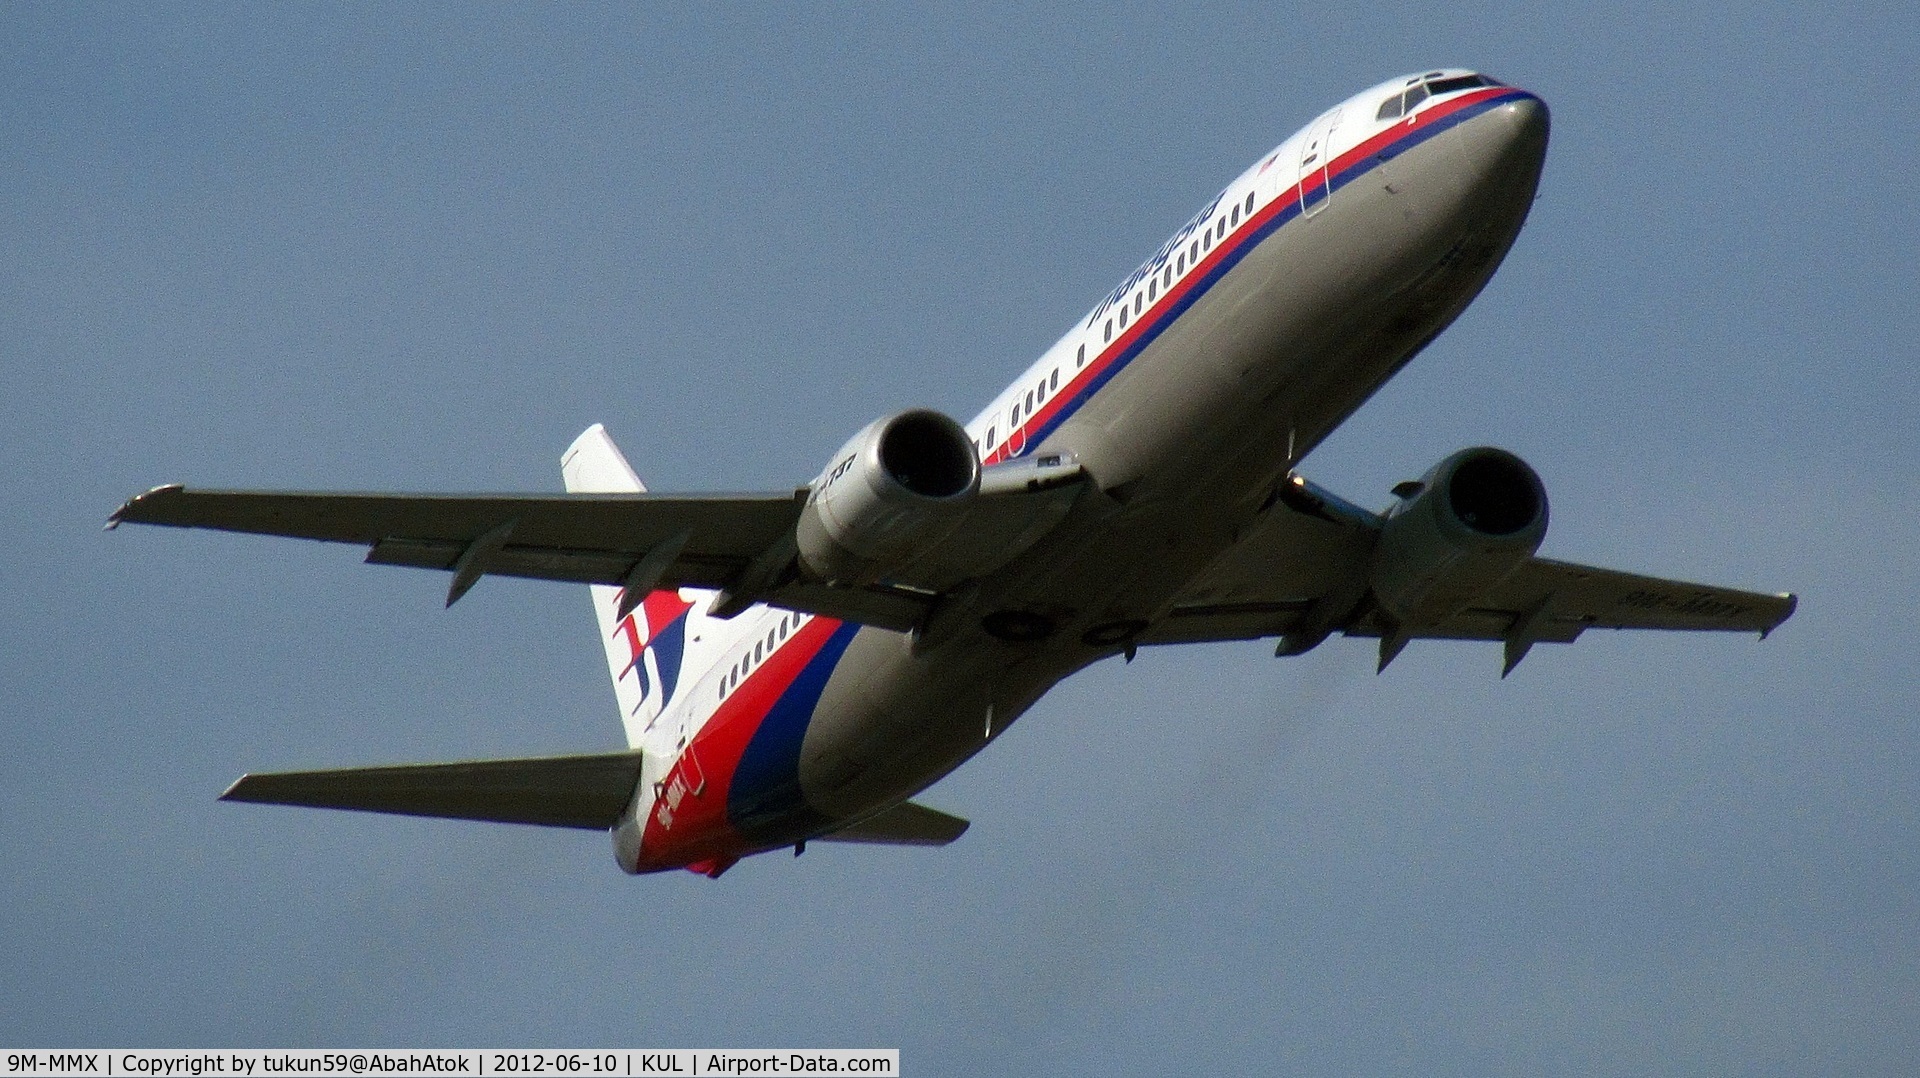 9M-MMX, Boeing 737-4H6 C/N 26452, Malaysia Airlines